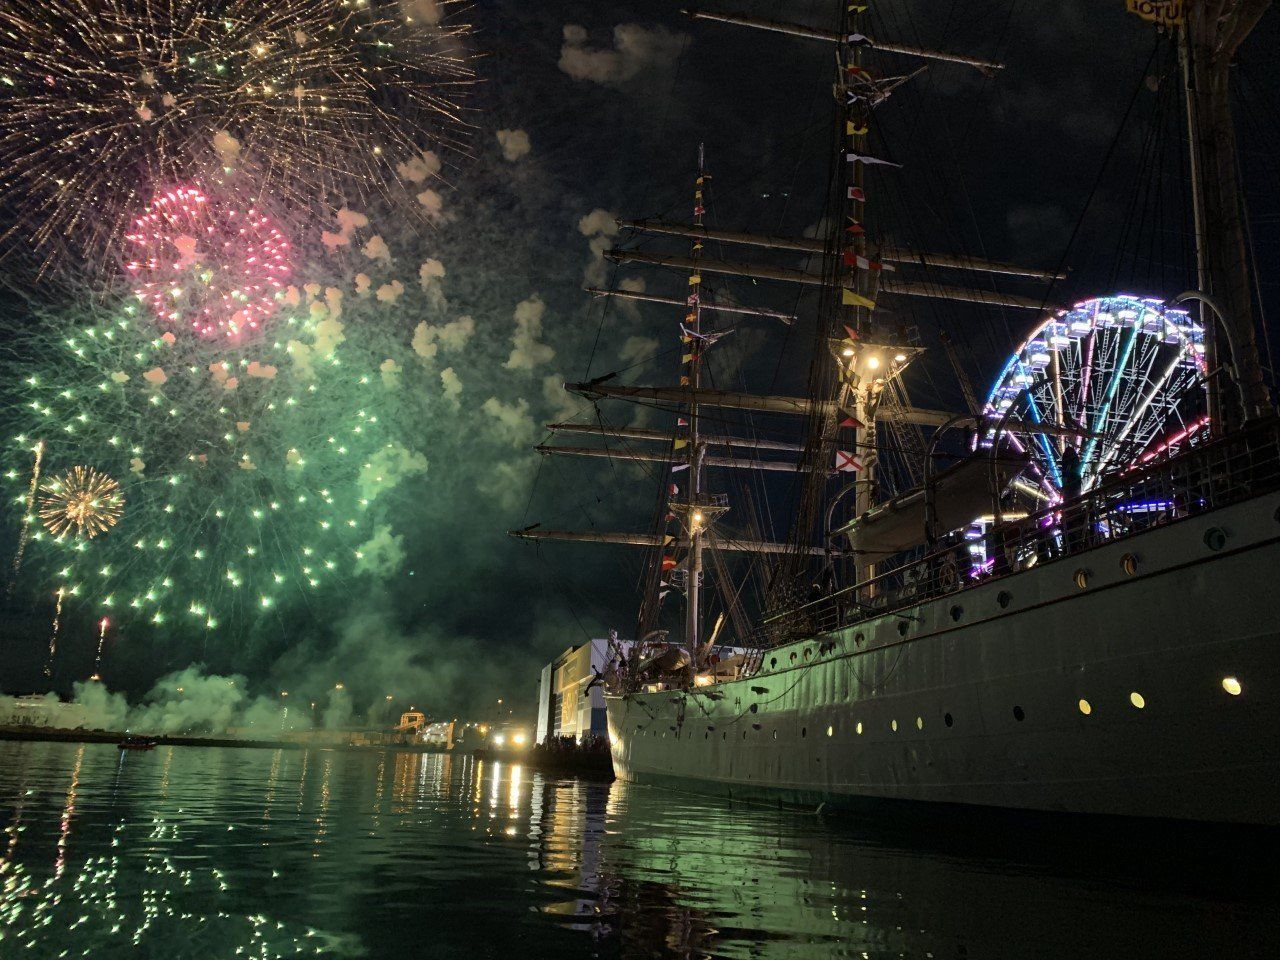 Fireworks are displayed over a boat in the water